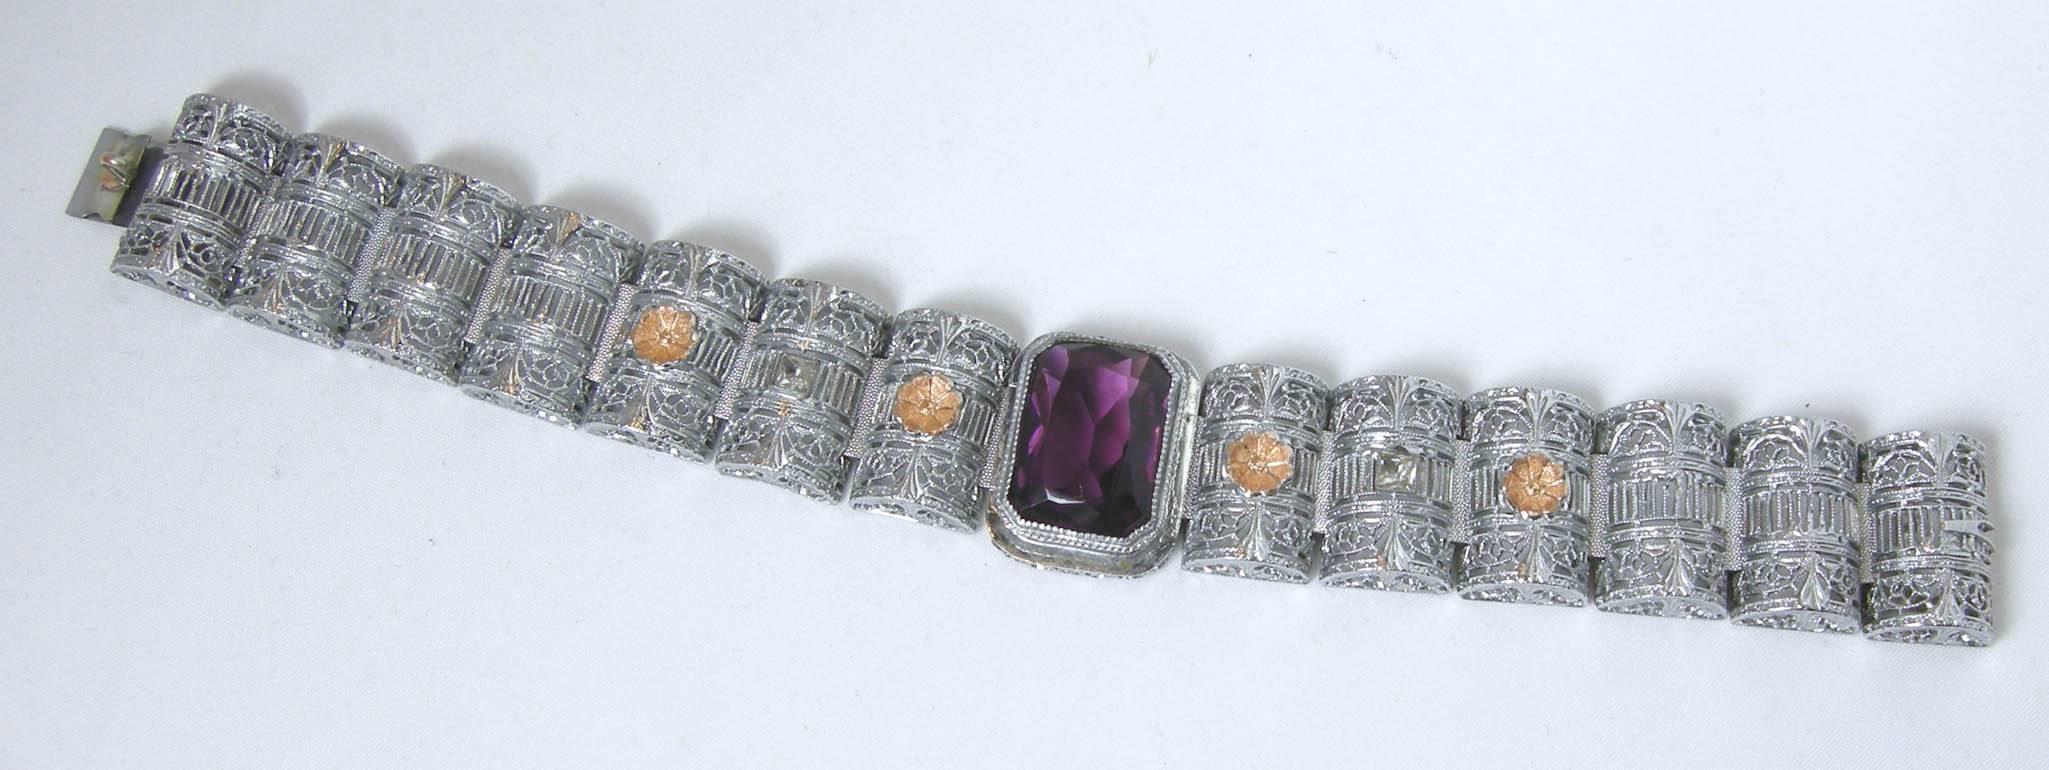 Vintage Retro Amethyst Glass, Mixed Metal Openwork Bracelet In Excellent Condition For Sale In New York, NY